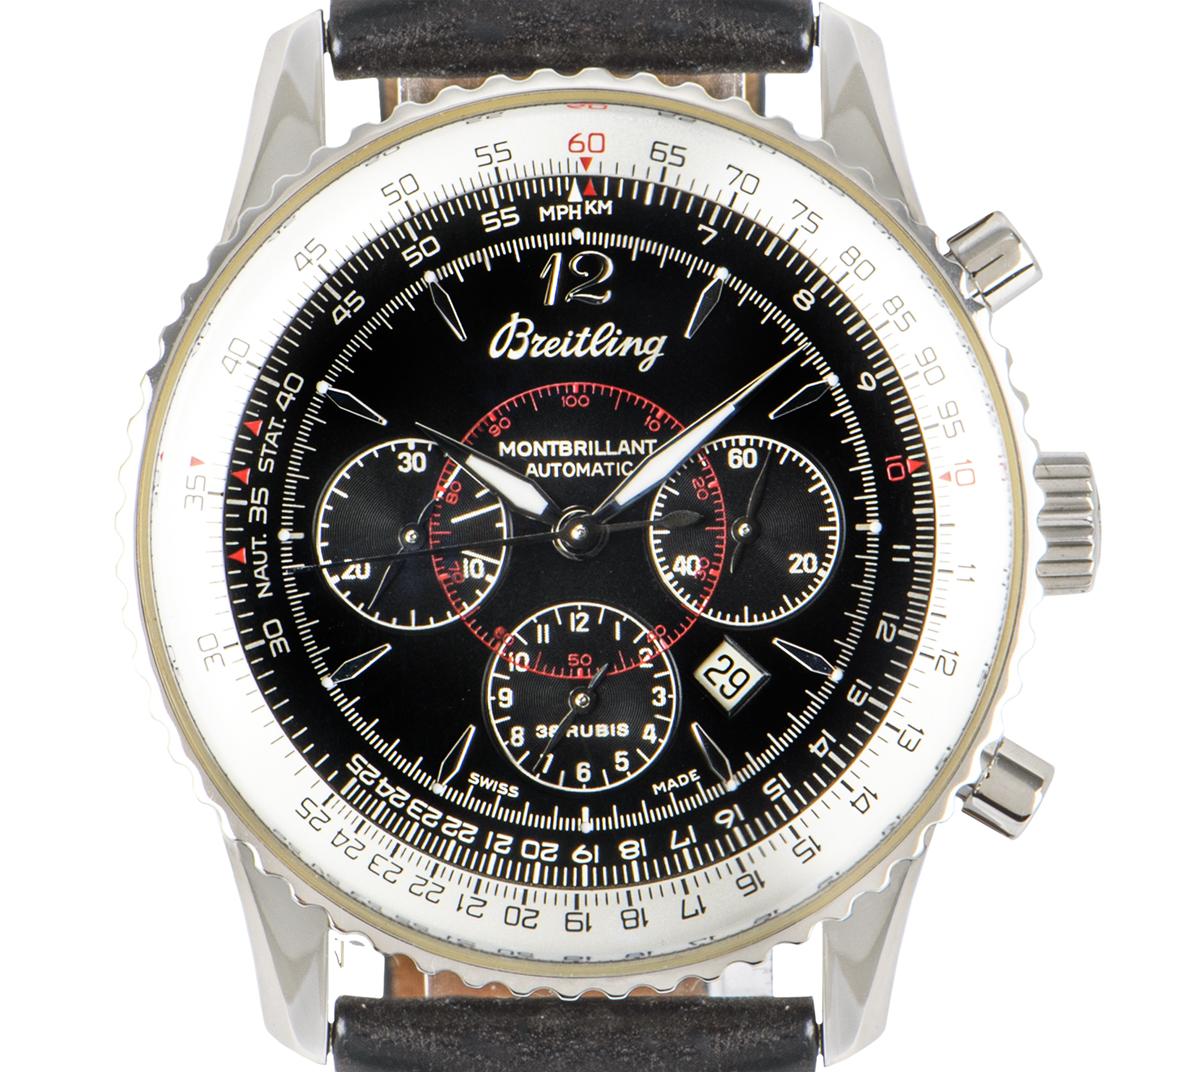 Brietling Navitimer Montbrillant Stainless Steel Watch A4133012 For Sale 1